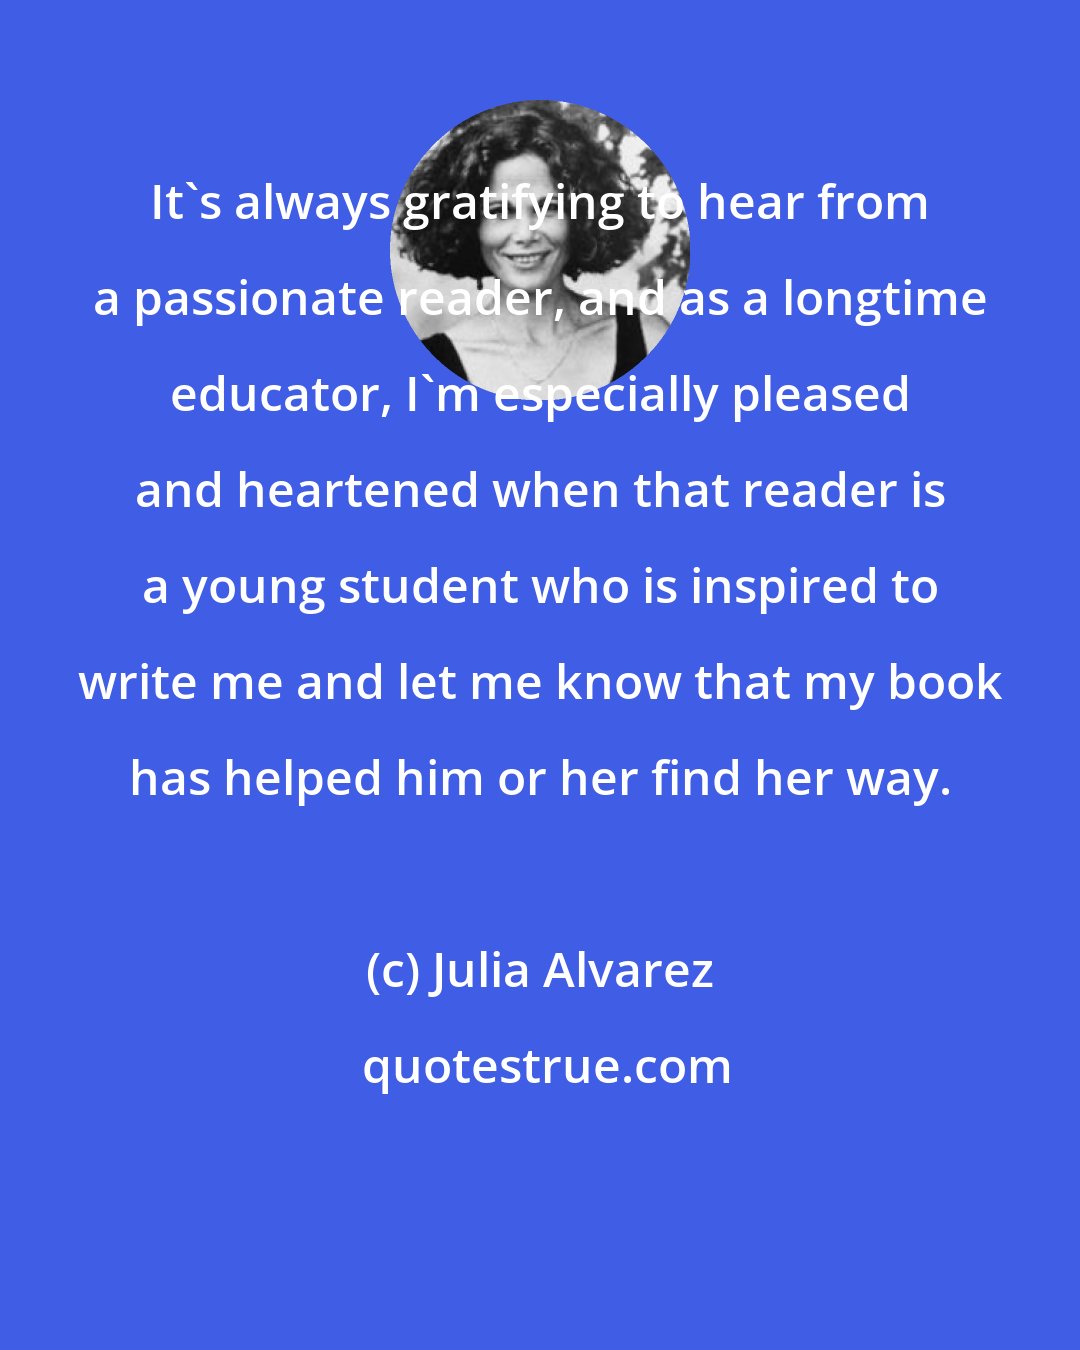 Julia Alvarez: It's always gratifying to hear from a passionate reader, and as a longtime educator, I'm especially pleased and heartened when that reader is a young student who is inspired to write me and let me know that my book has helped him or her find her way.